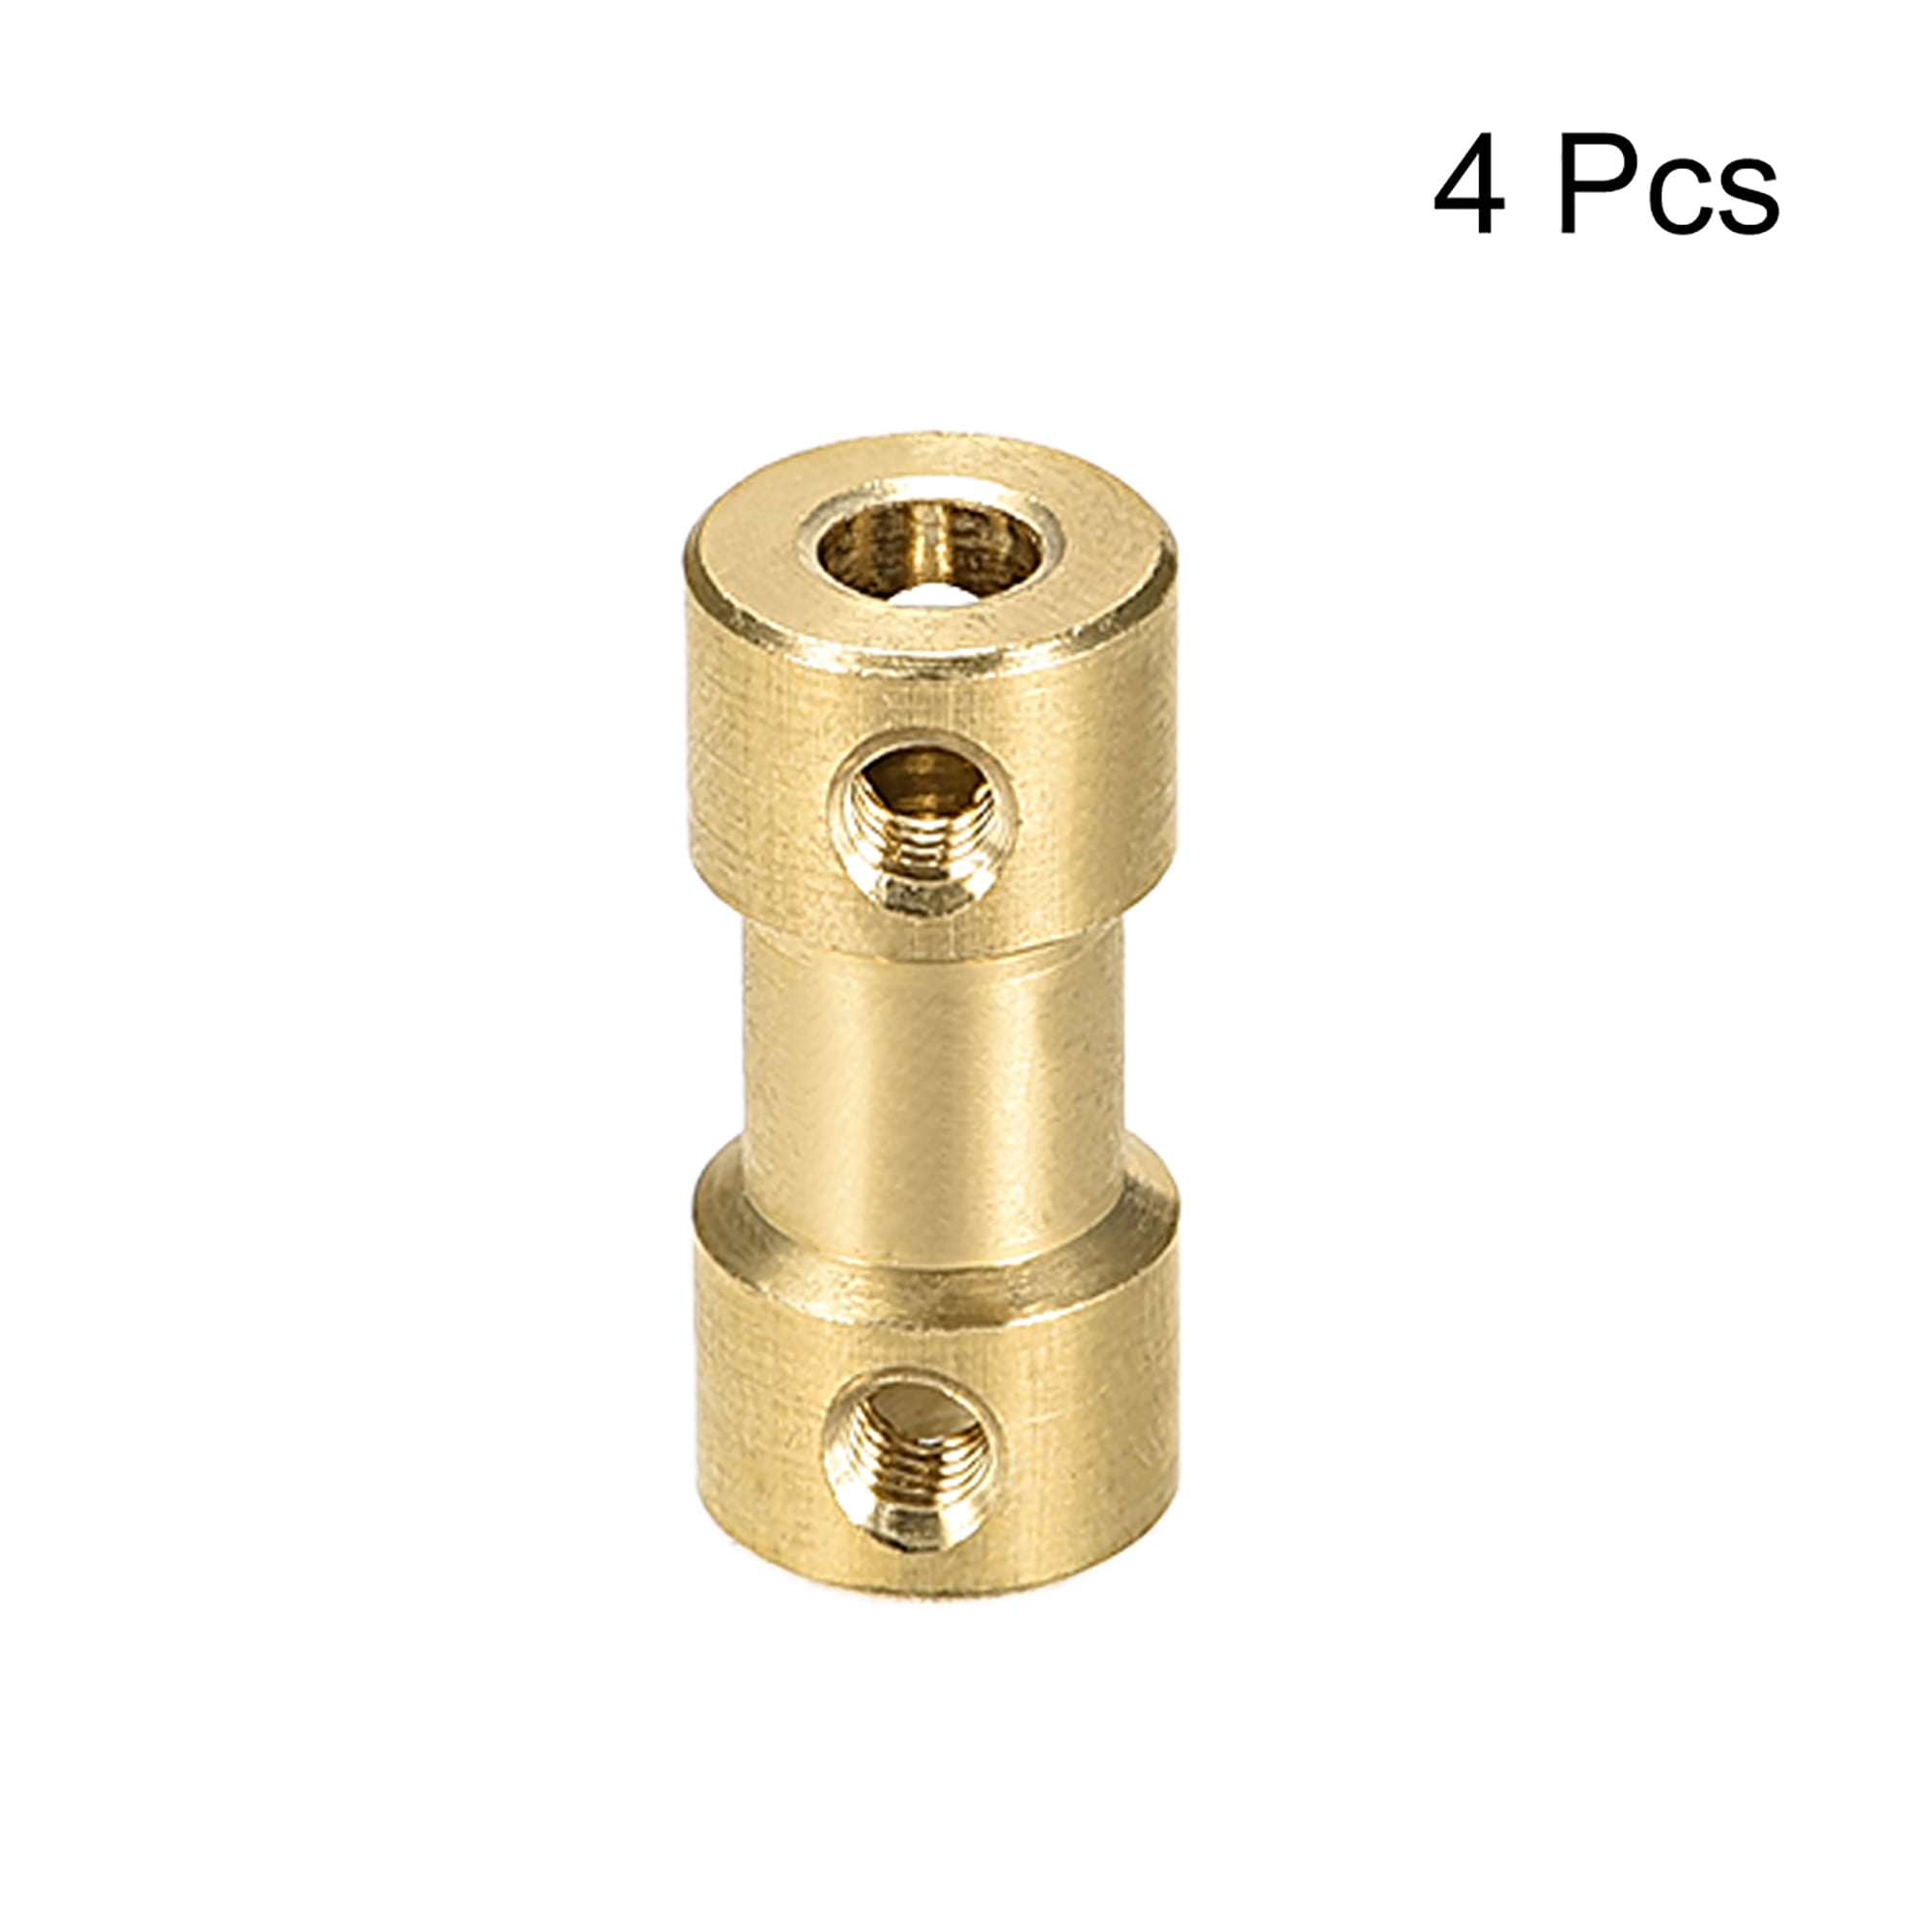 uxcell 2mm to 3mm Bore Rigid Coupling Copper Shaft Coupler Connector Brass Tone 4Pcs 20mm Length 9mm Diameter 